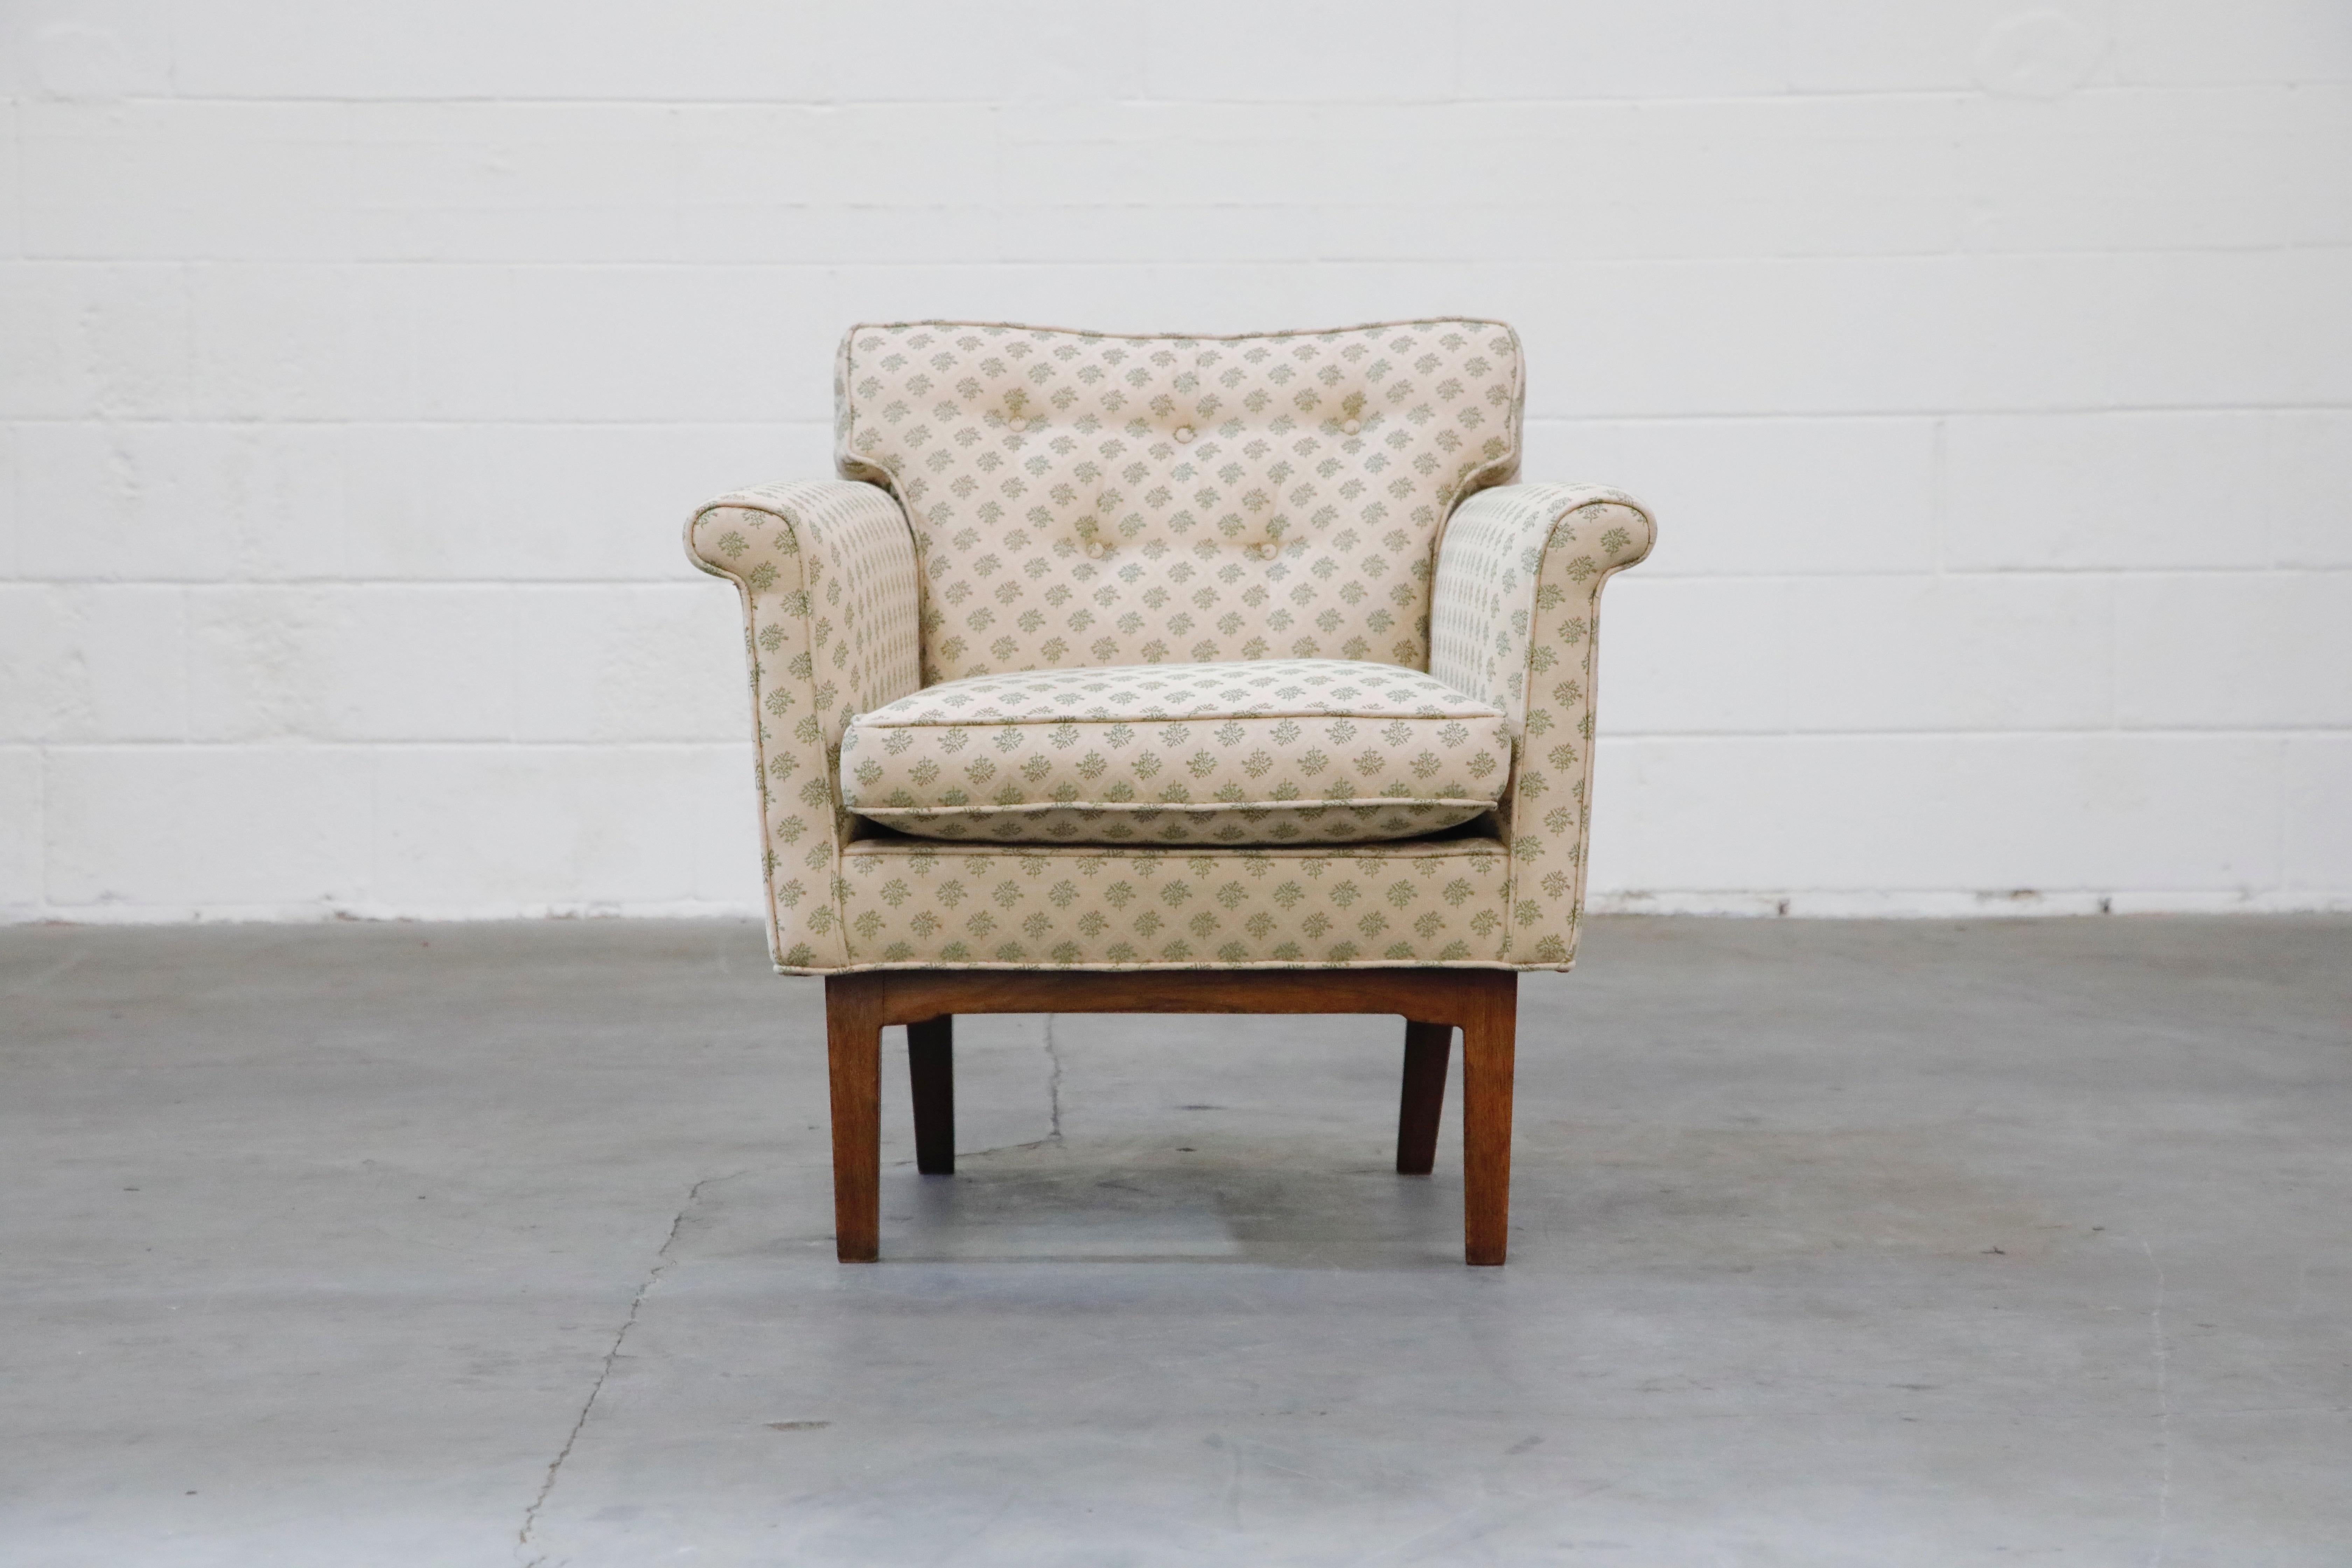 Elegant model 5706 chair by Edward Wormley for Dunbar. This lounge armchair features a simplistic design with rolled arms, tufted seat back, loose seat and back cushions, on a sculpted walnut base. This stylish armchair has been reupholstered in